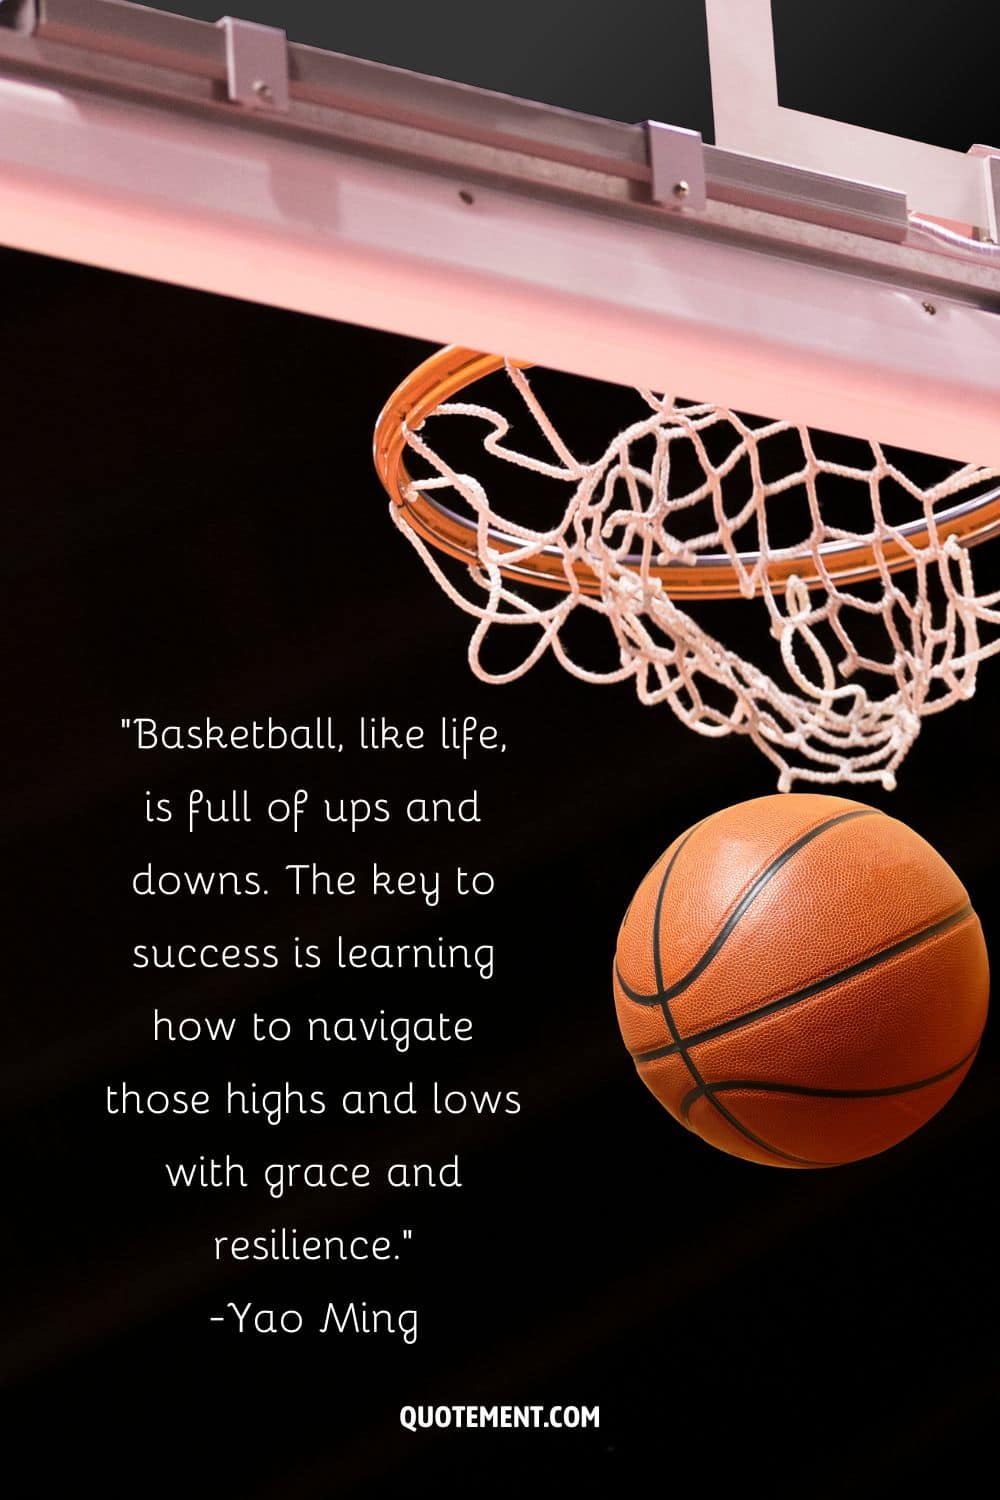 Basketball, like life, is full of ups and downs